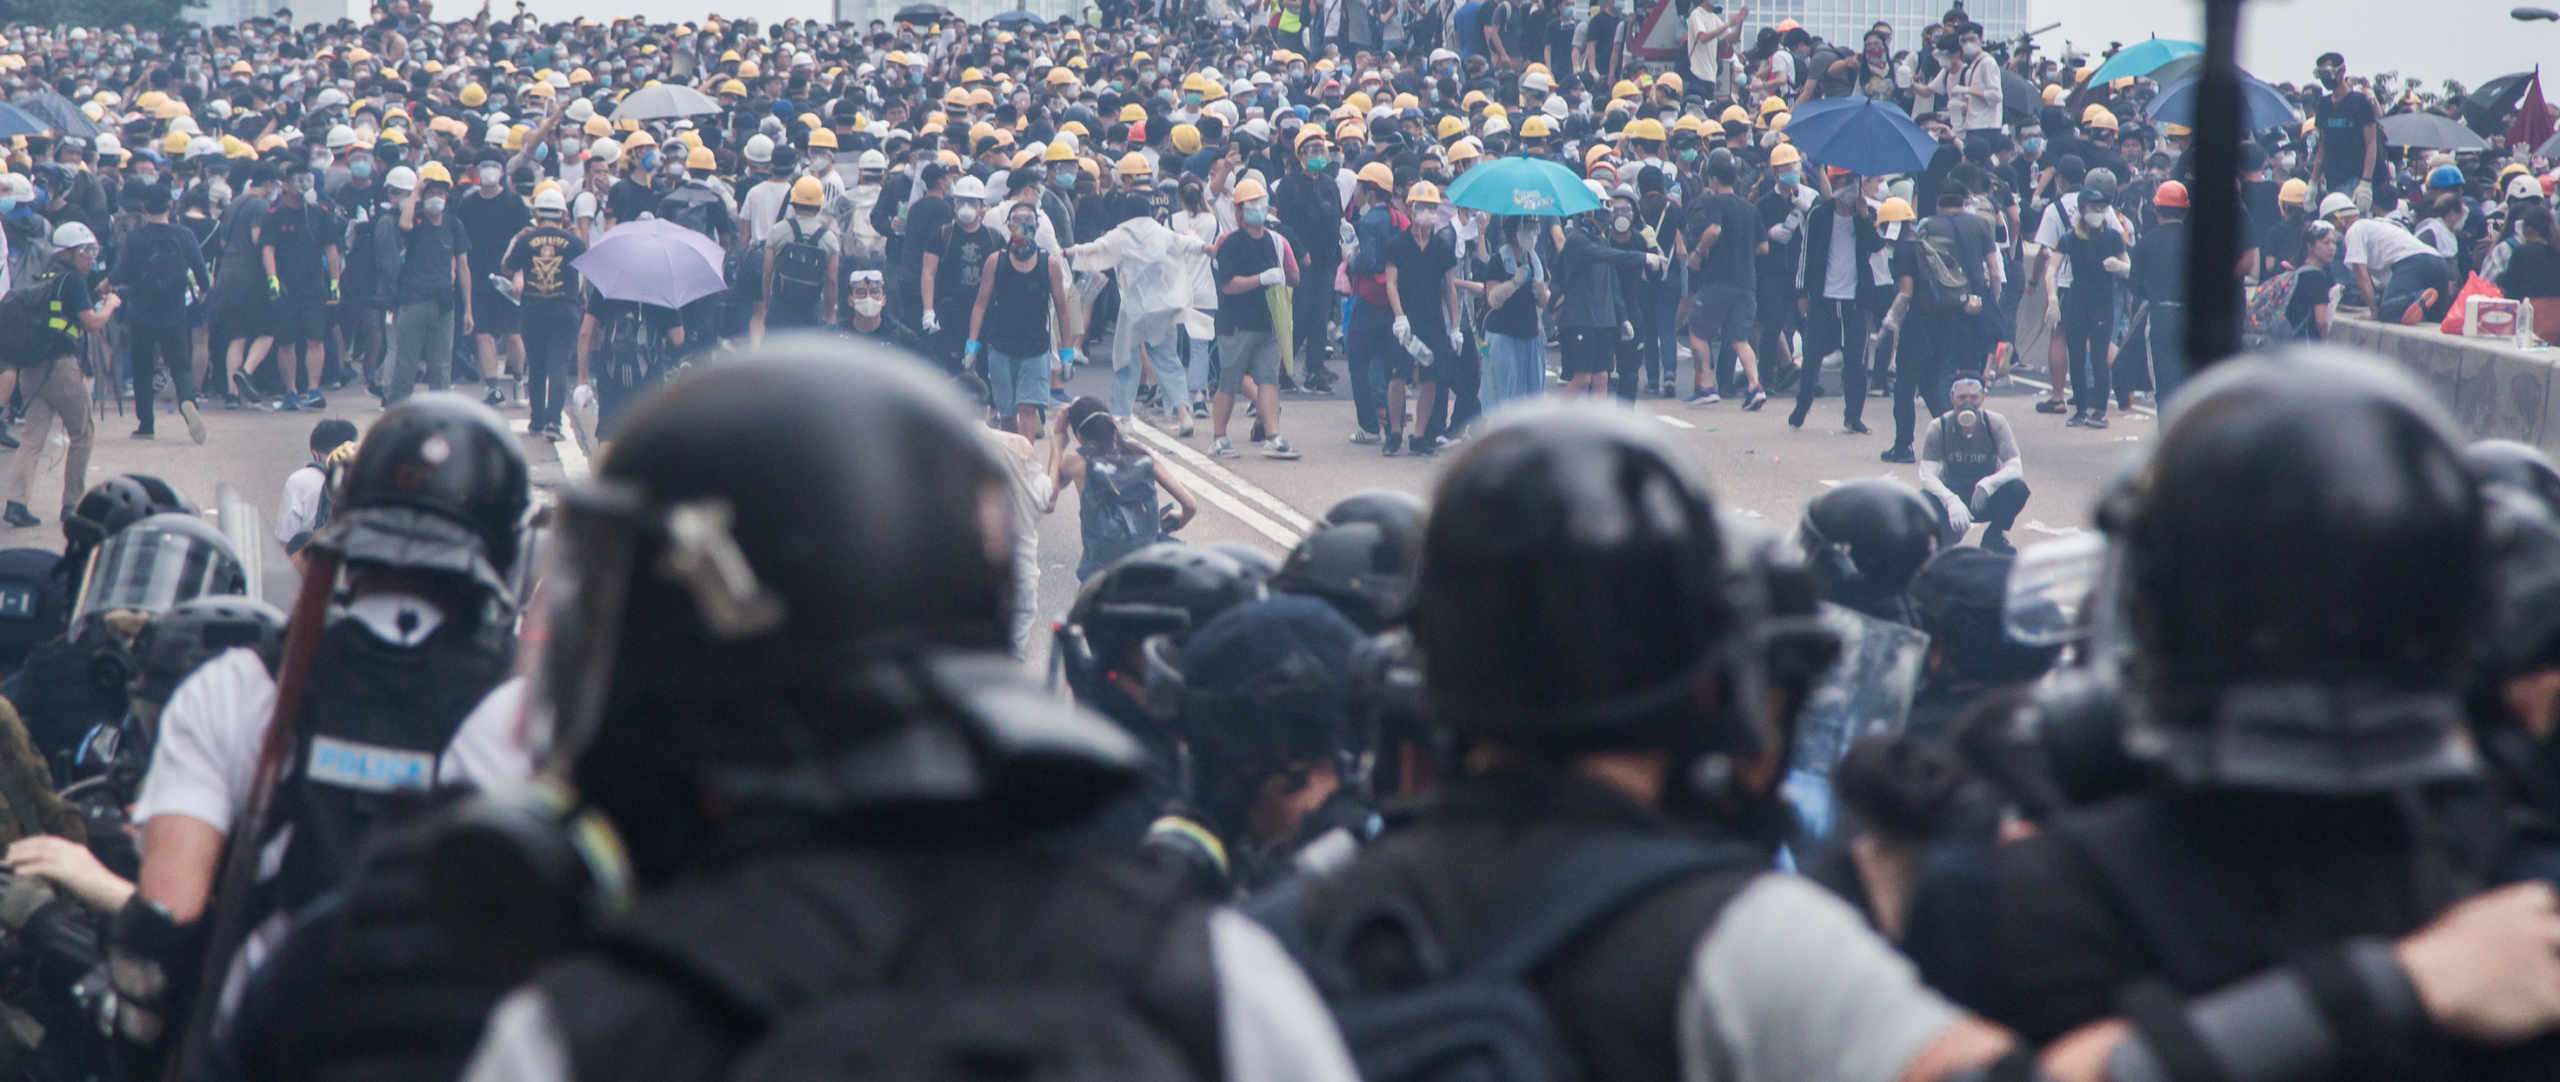 Under 14 Xxx Vidio - Sexual violence against Hong Kong protesters â€“ what's going on? - Amnesty  International